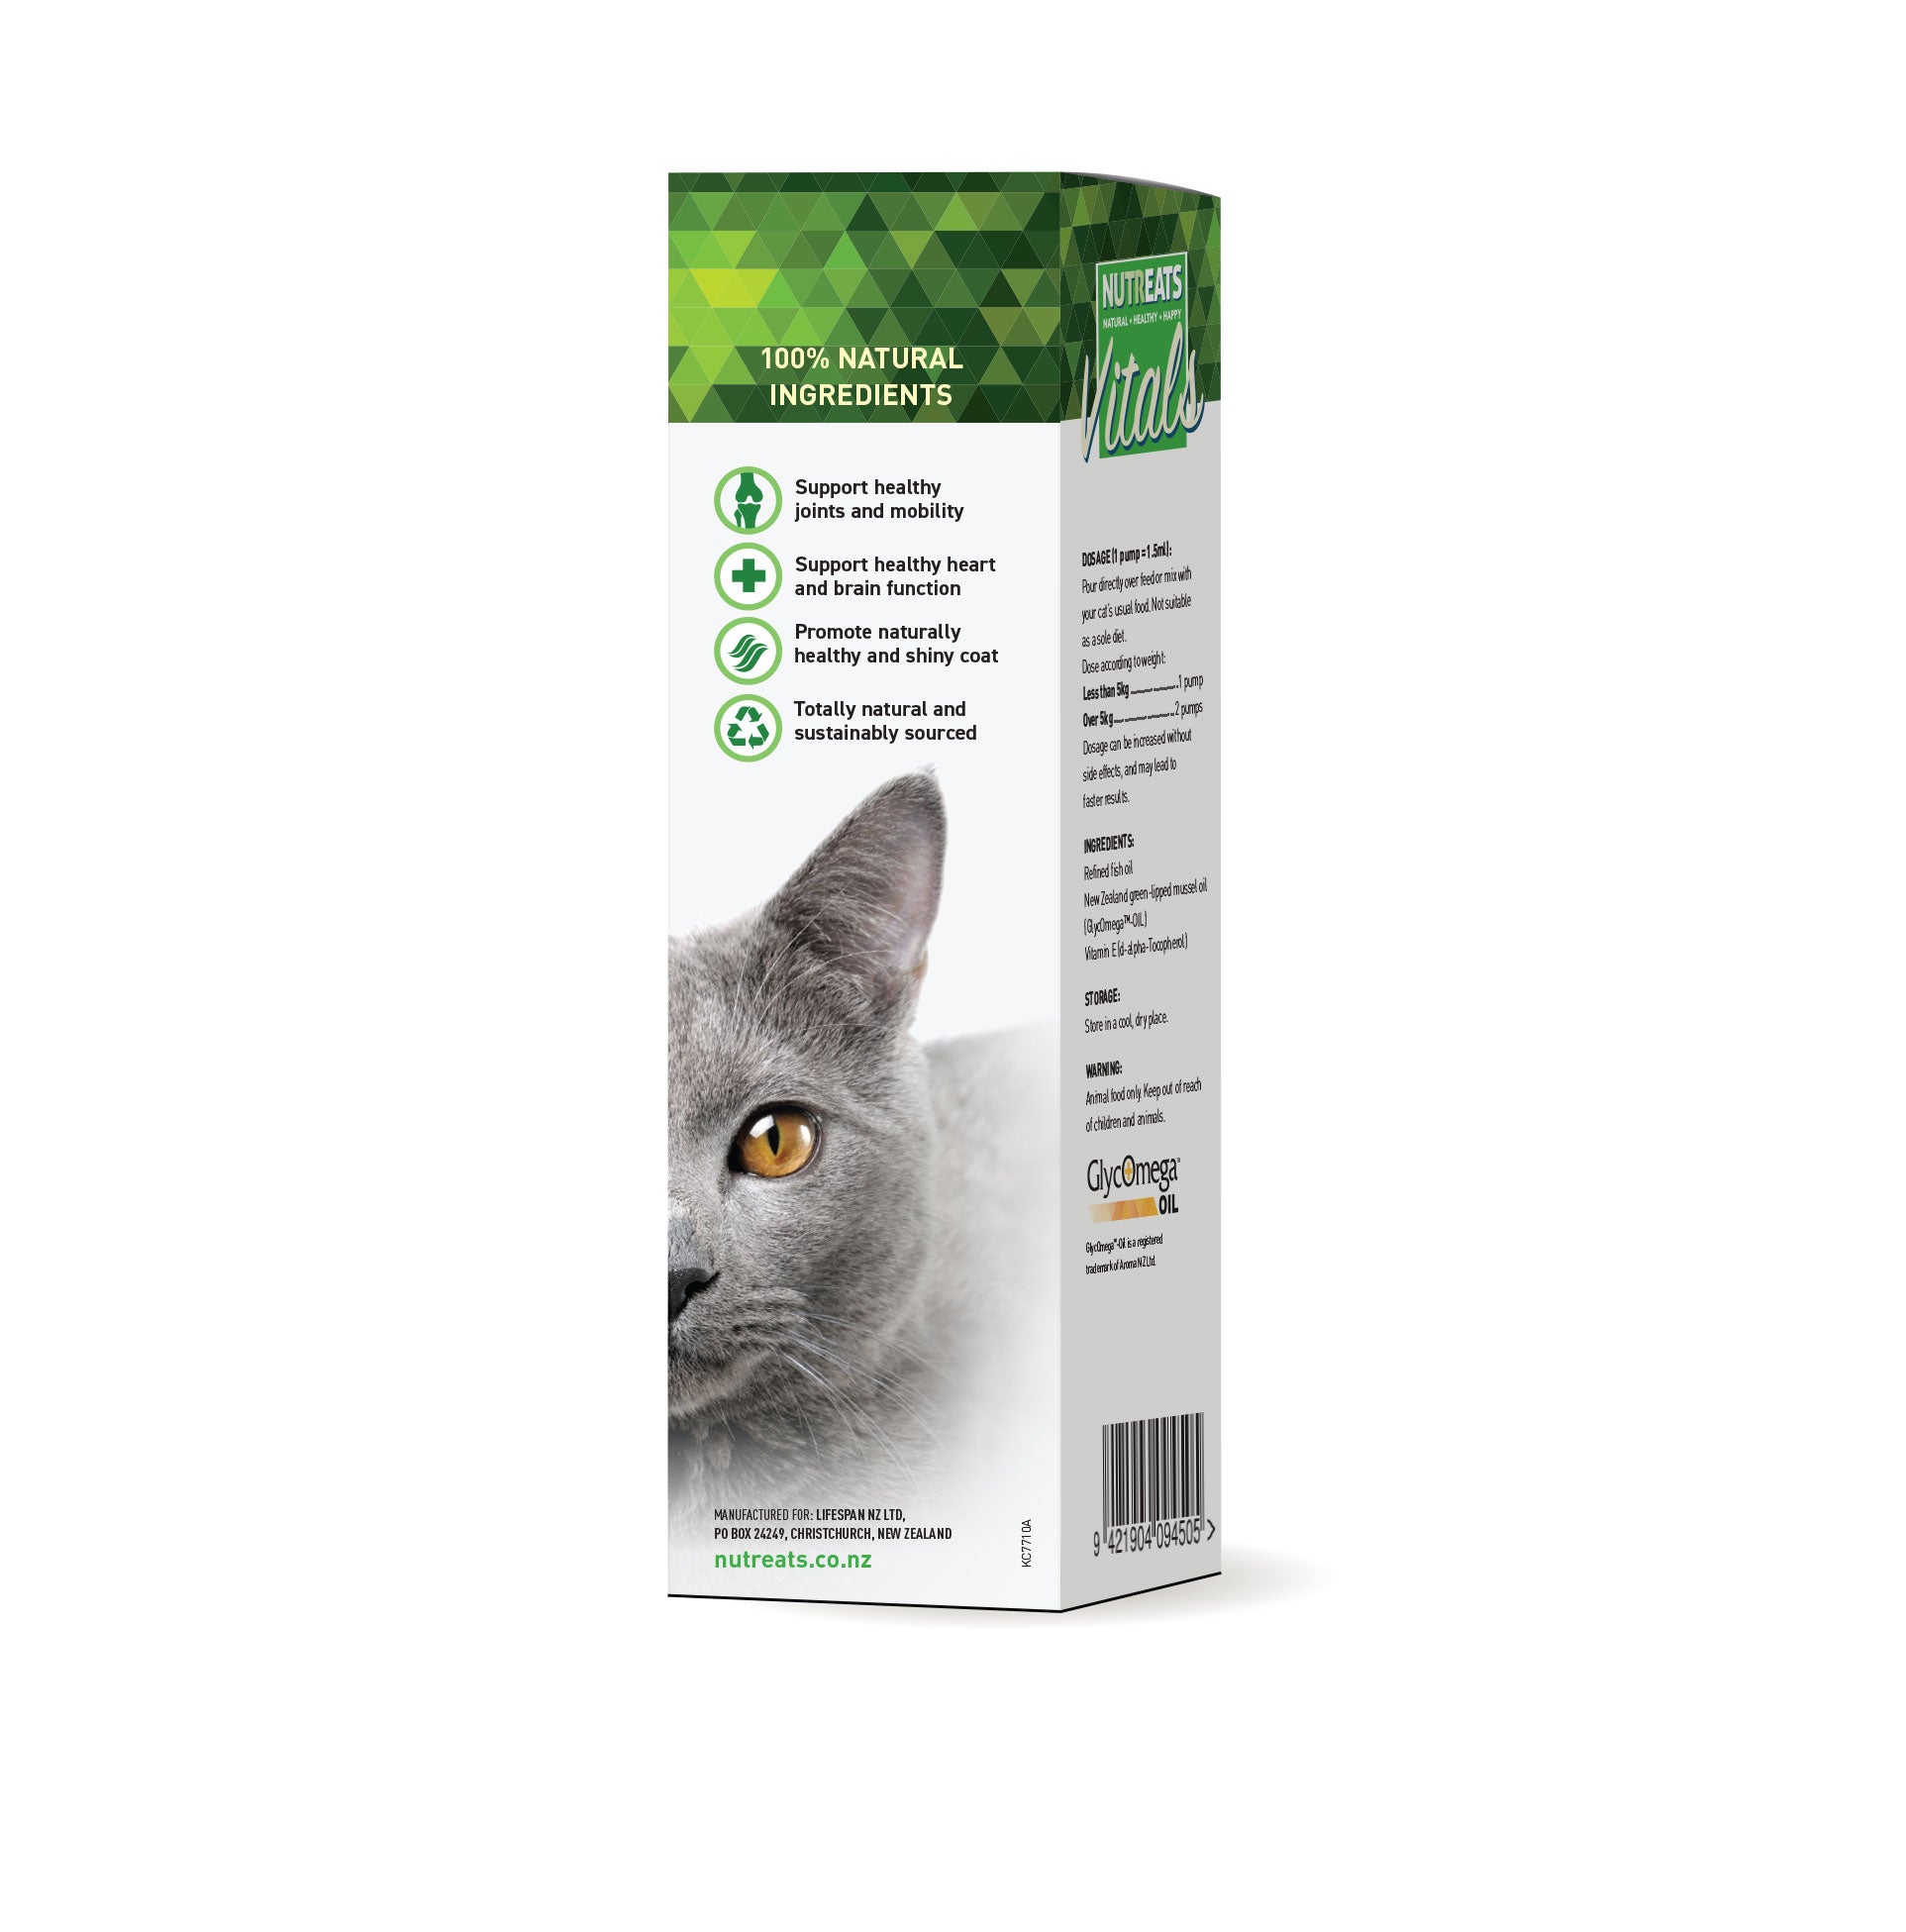 Nutreats Skin, Coat and Mobility oil for cats - supplement for healthy skin, coat and supporting mobility in cats. 100% natural nutritional supplement. Supporting healthy joints and mobility in cats. Supports healthy heart and brain function. Promotes naturally healthy shiny coat. 100% natural grain free supplement for cats.